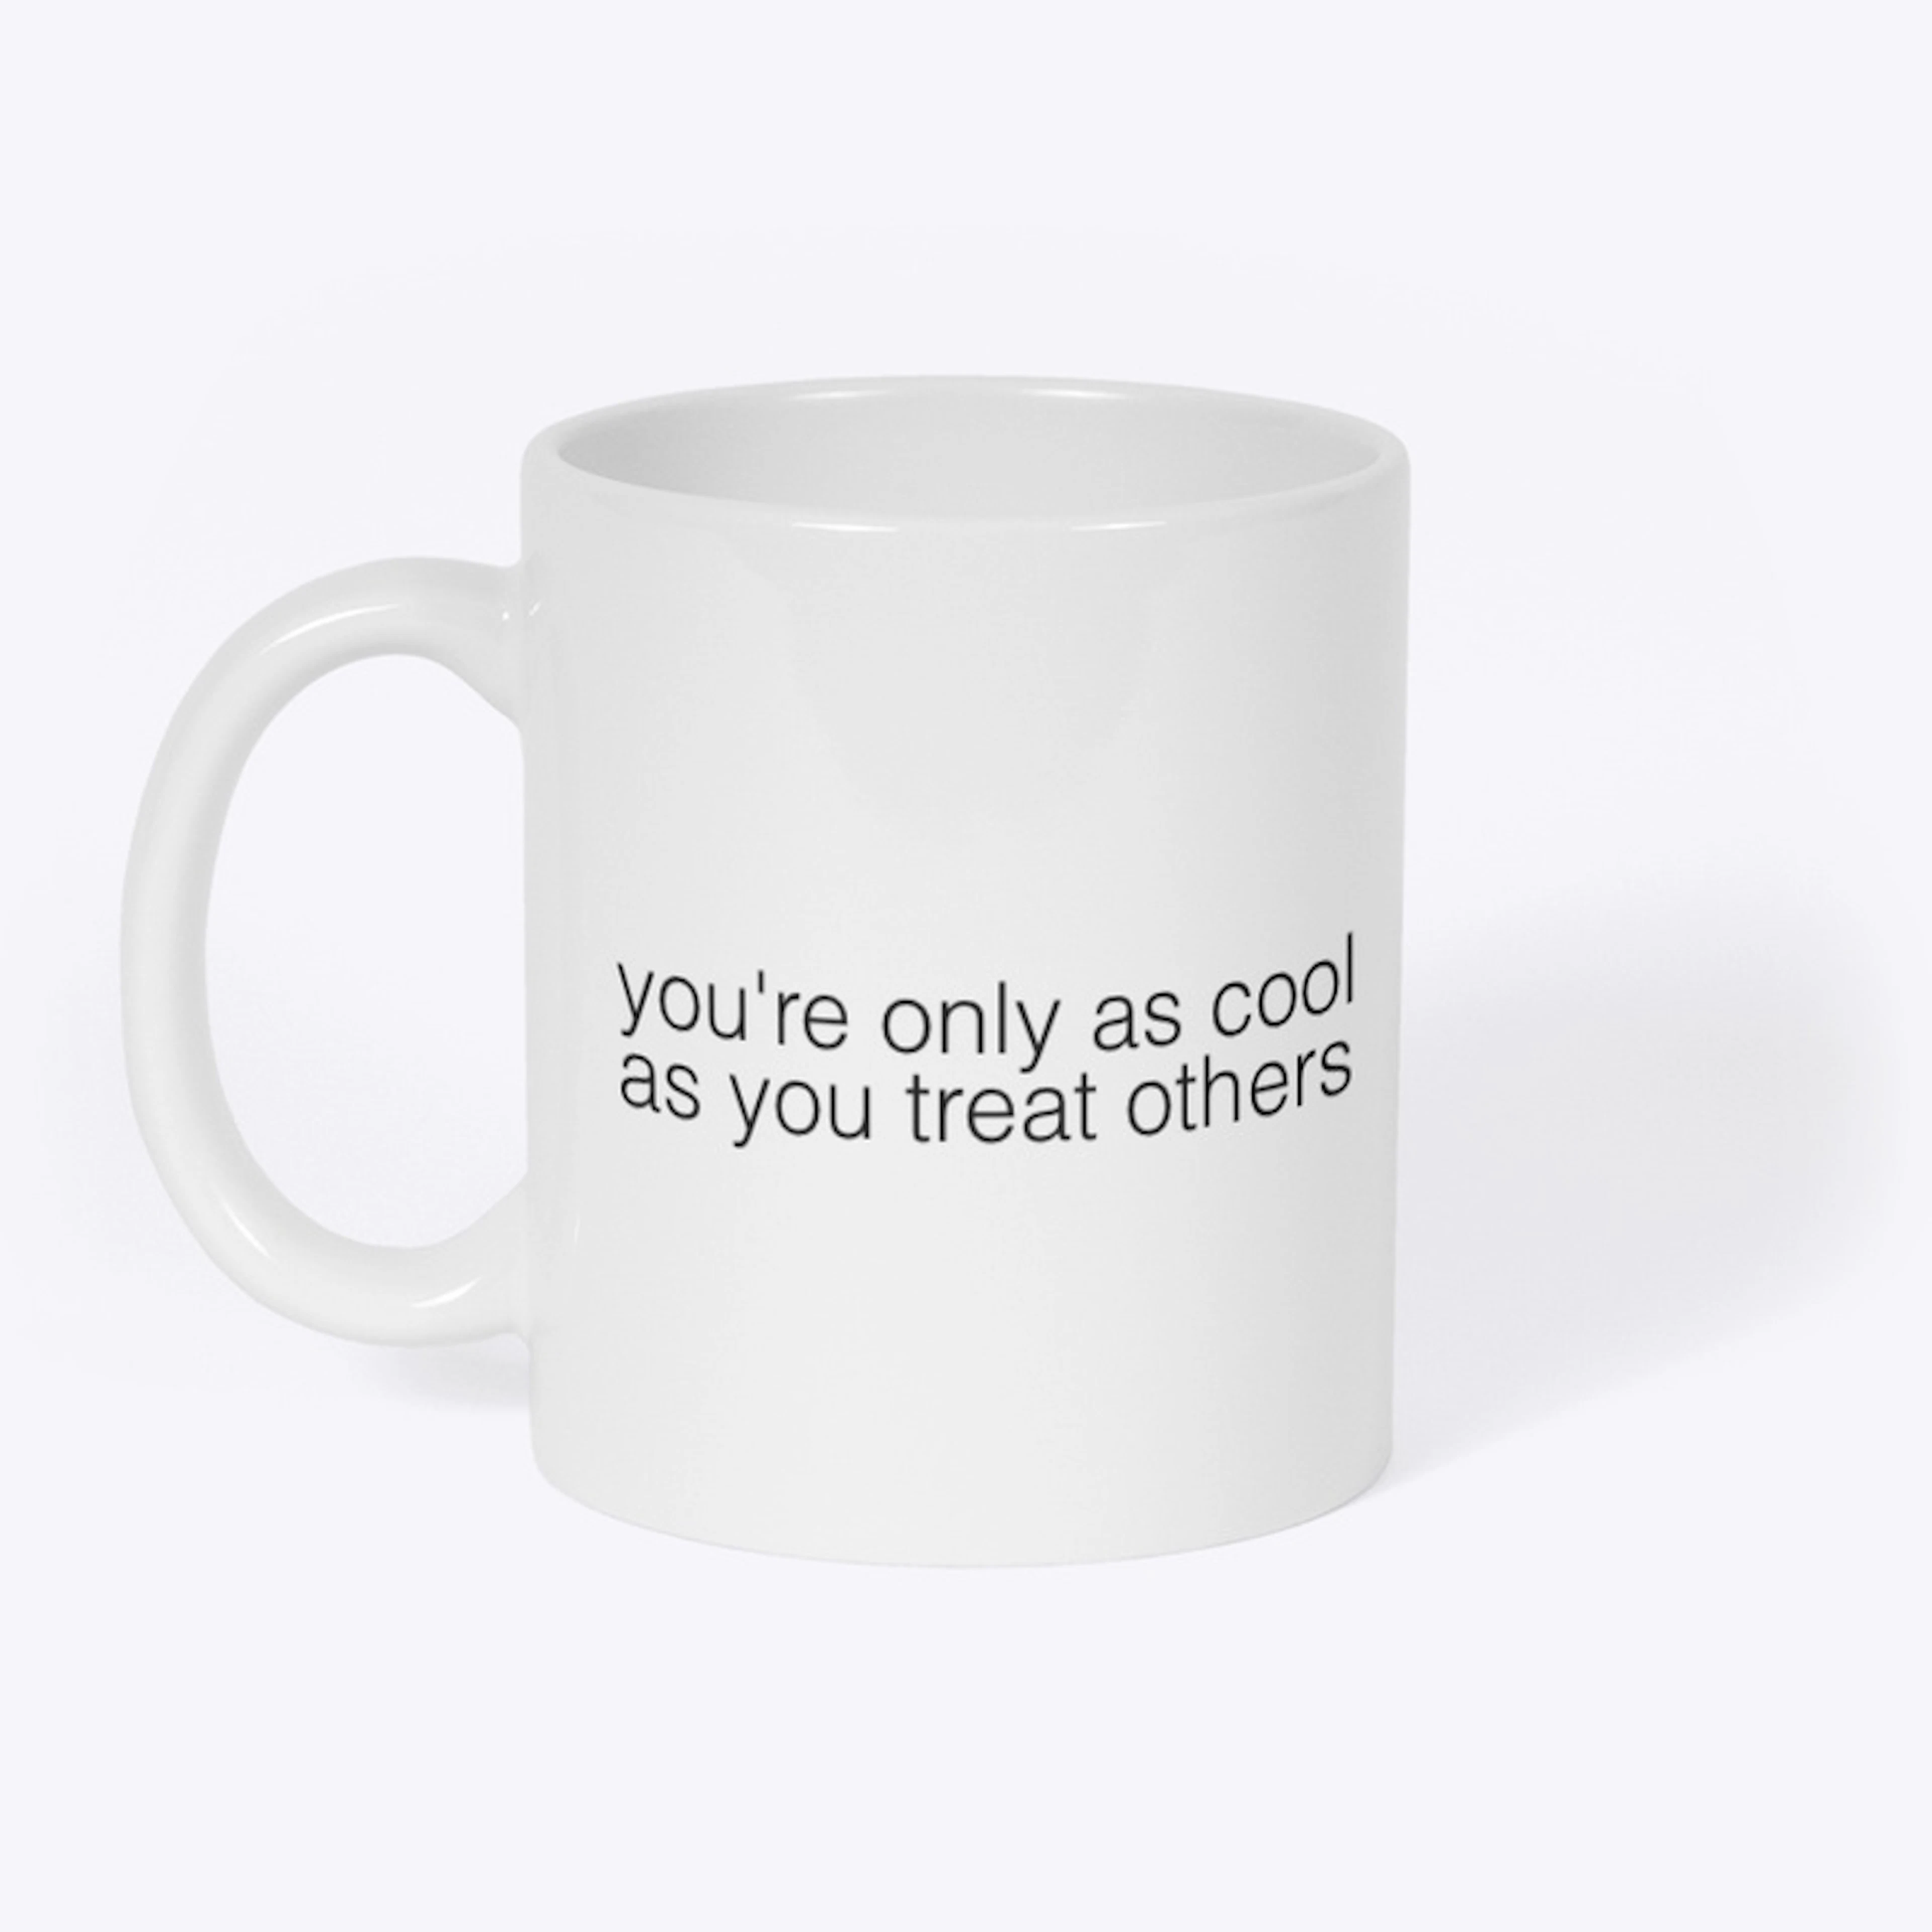 “you’re only as cool as you treat others